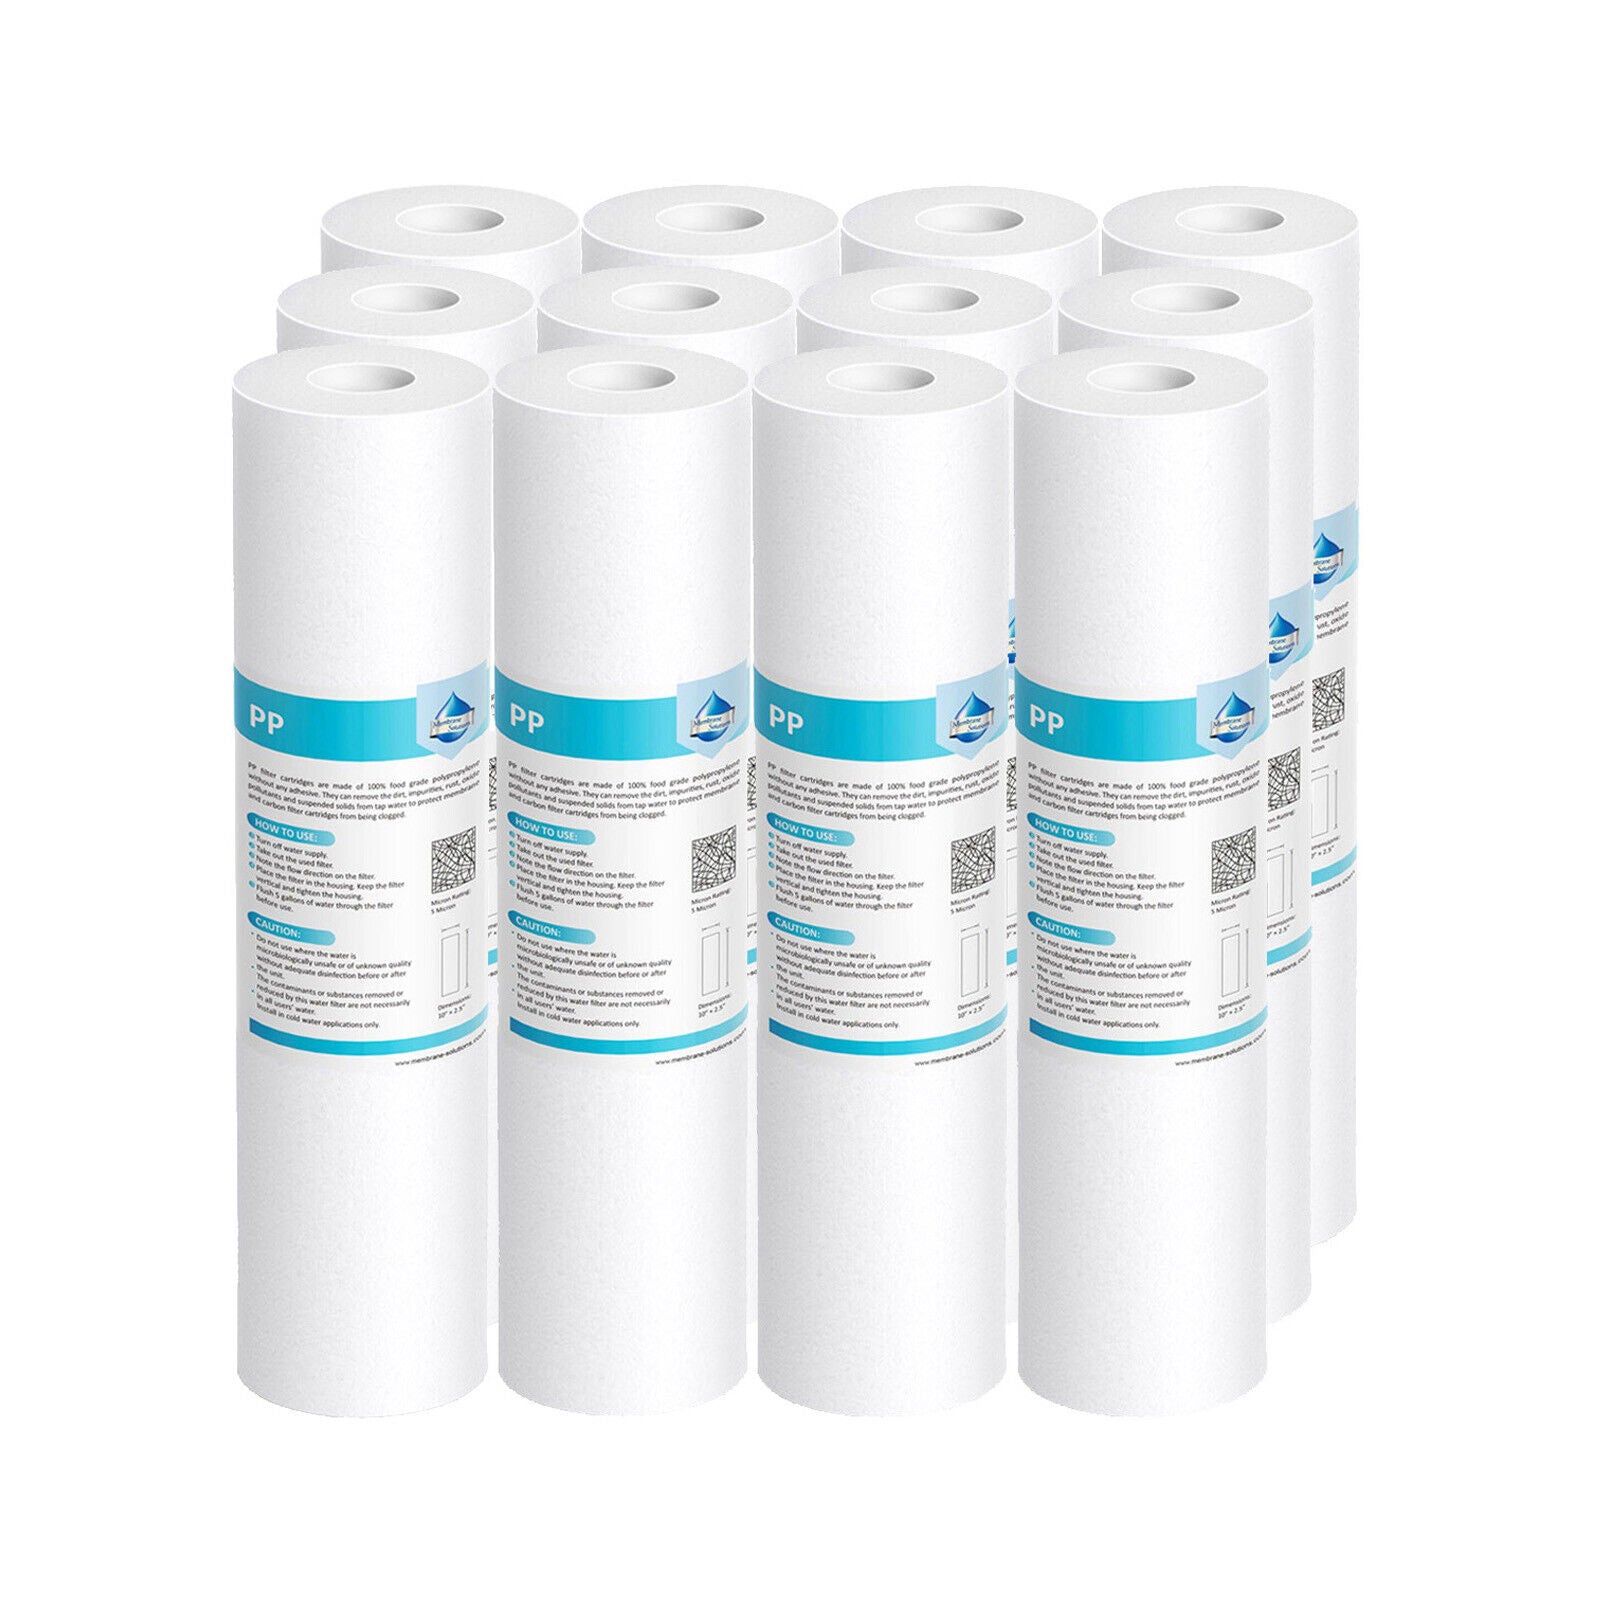 Membrane Solutions 10" x 2.5" Whole House 5 Micron PP Sediment Water Filter Replacement Cartridge